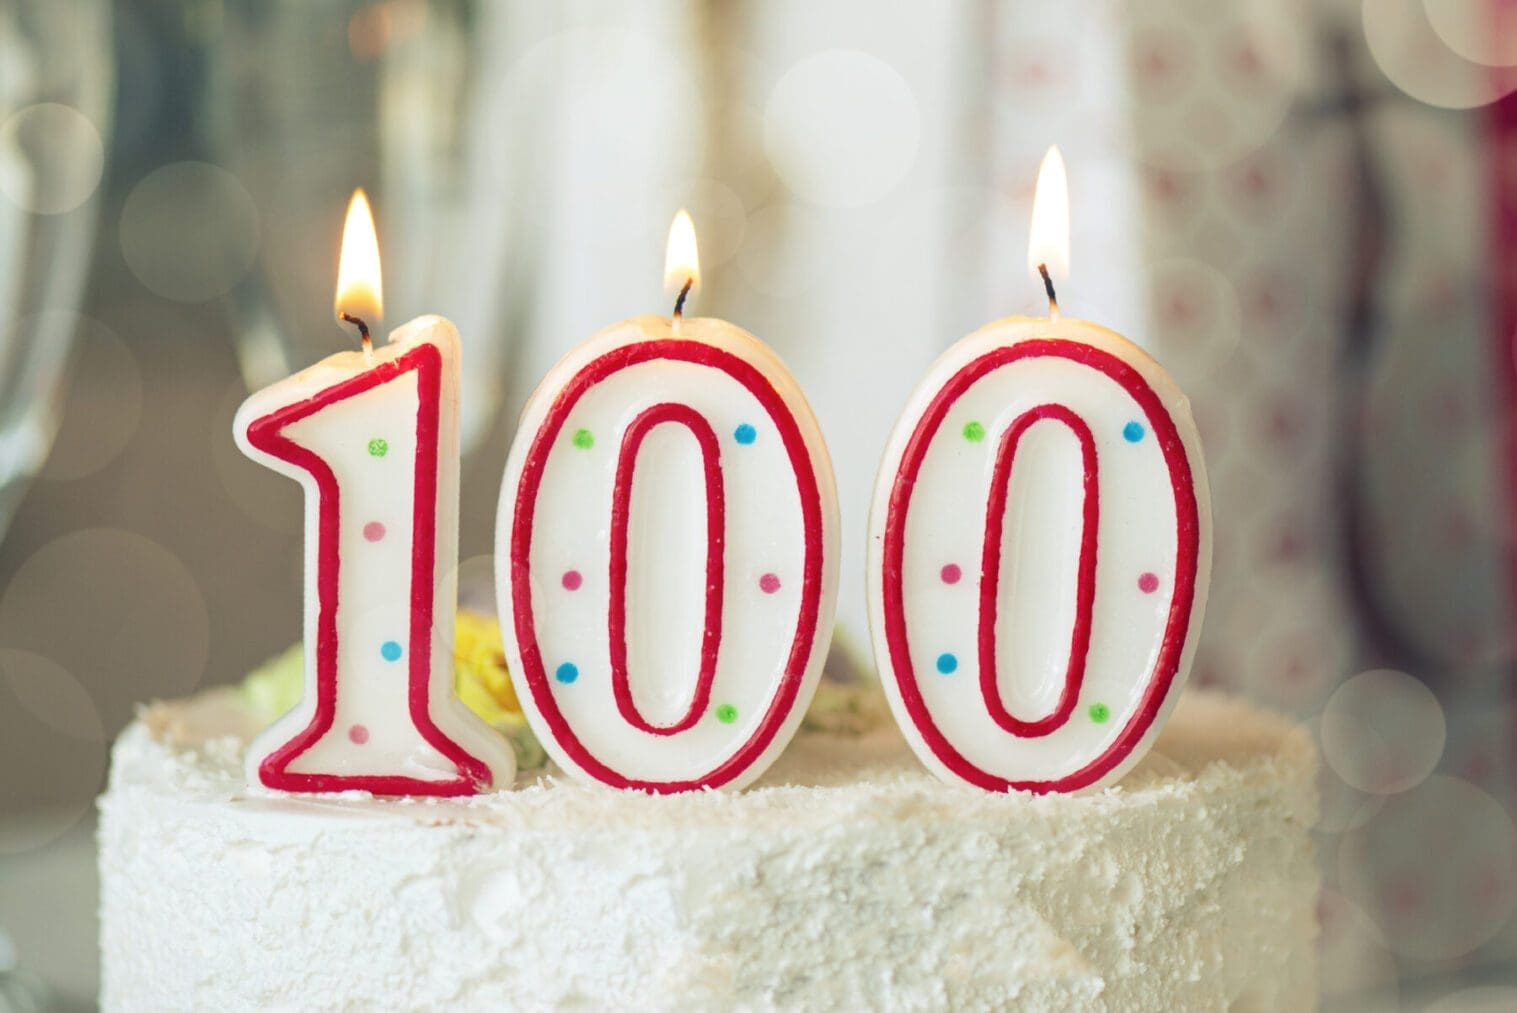 Birthday cake with candles that are lit and spell out 100